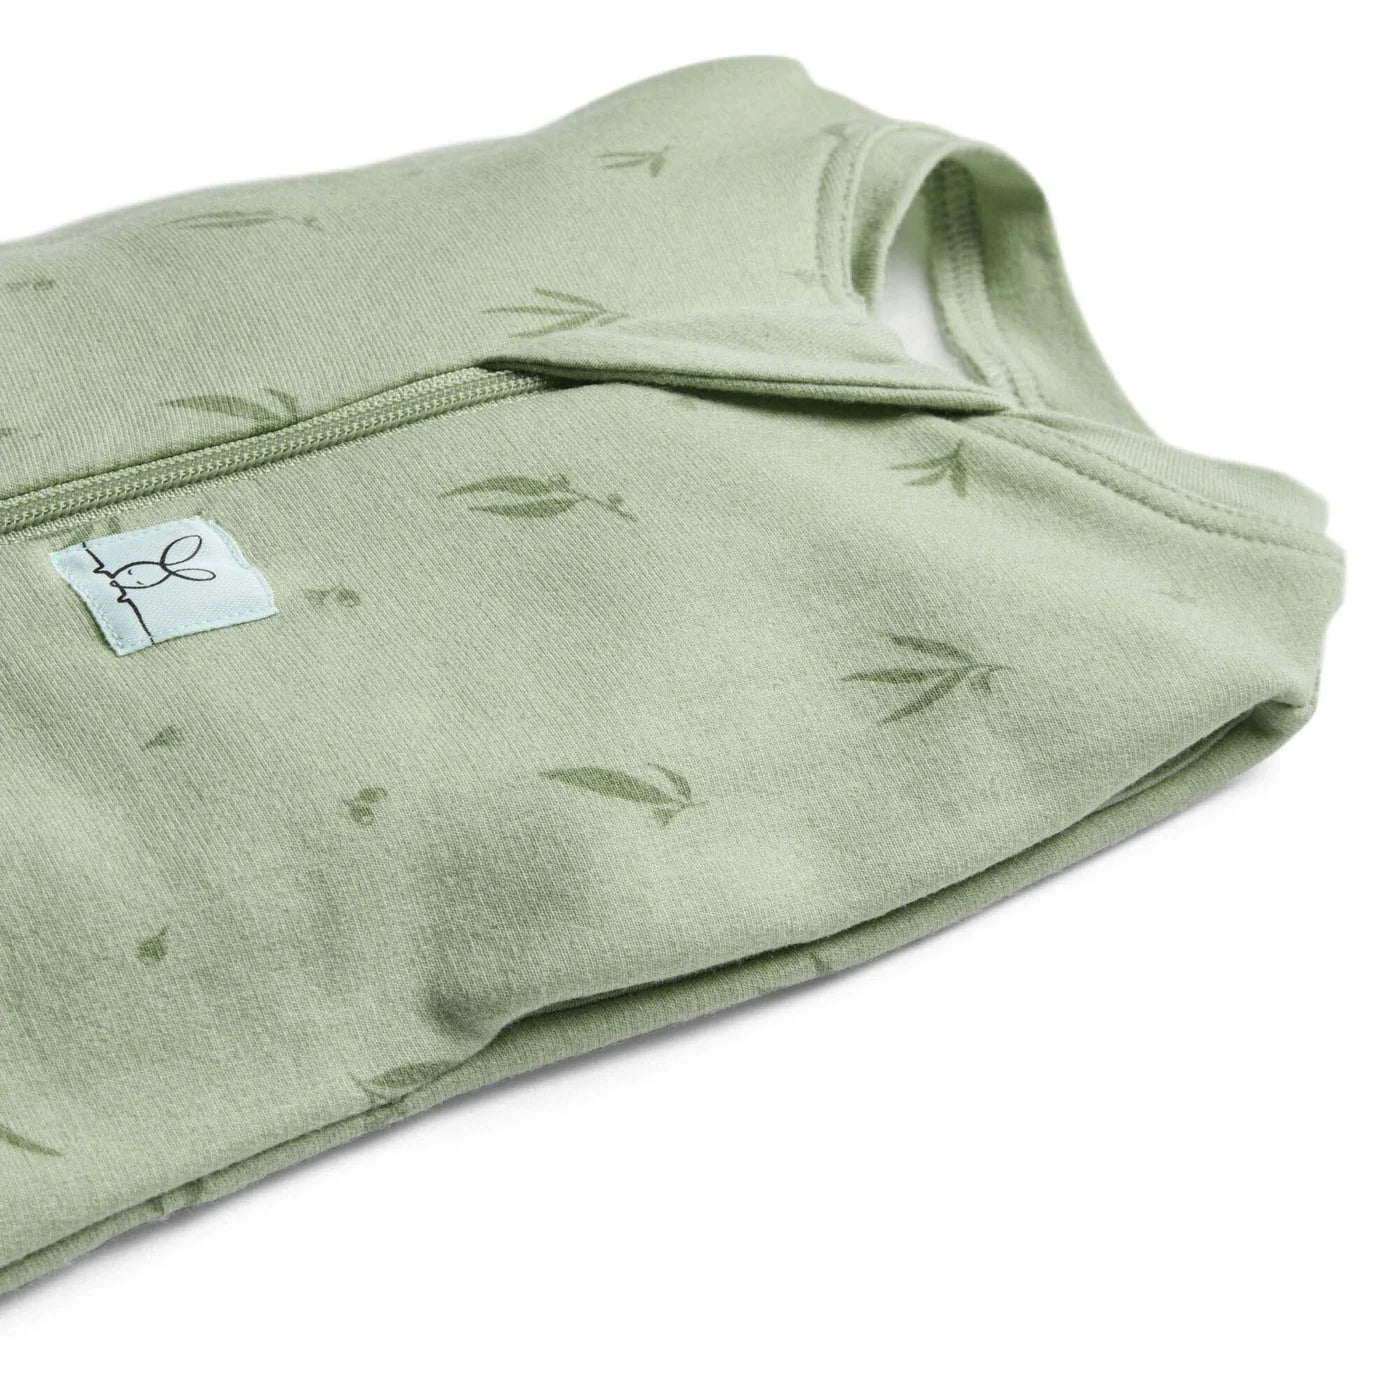 Ergo Pouch 1.0 tog Swaddle Bag (Willow)